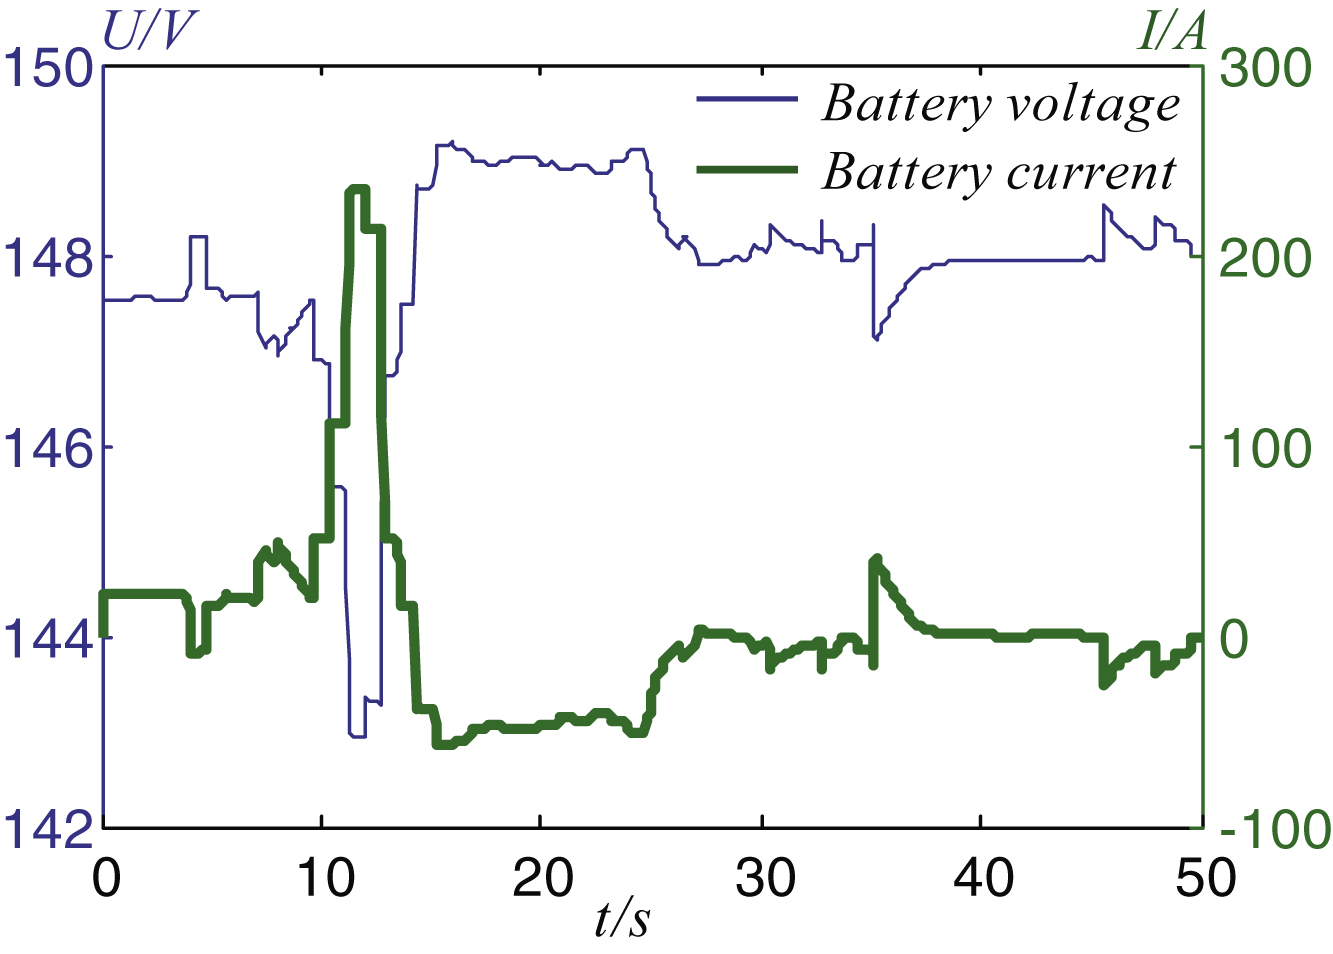 Current and voltage of the battery.